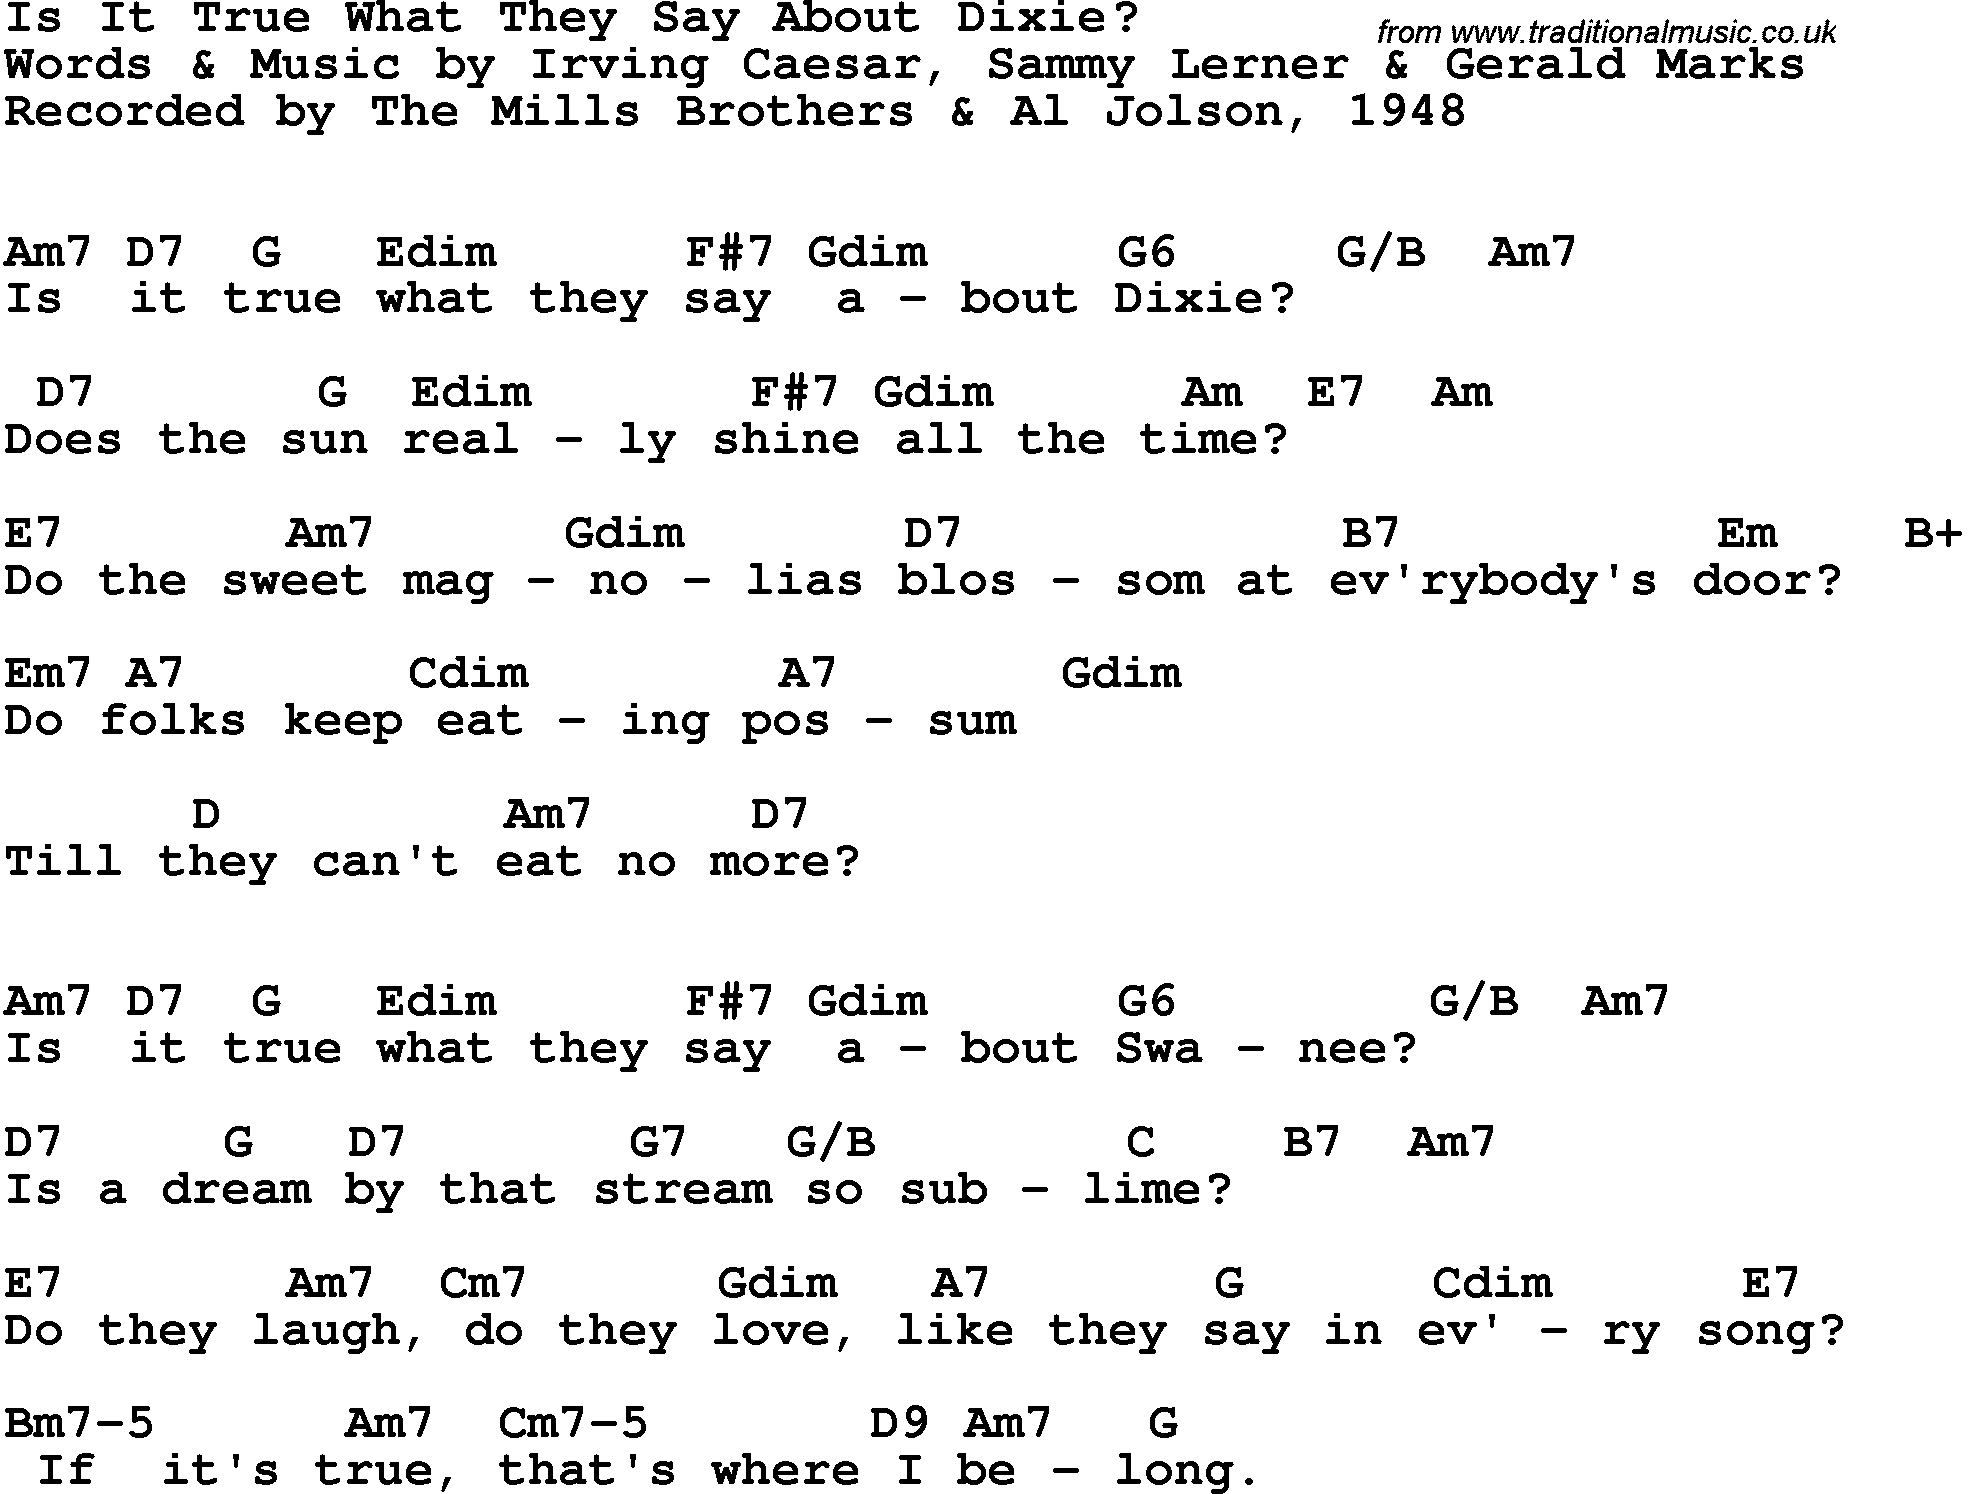 Song Lyrics with guitar chords for Is It True What They Say About Dixie - The Mills Brothers & Al Jolson, 1948